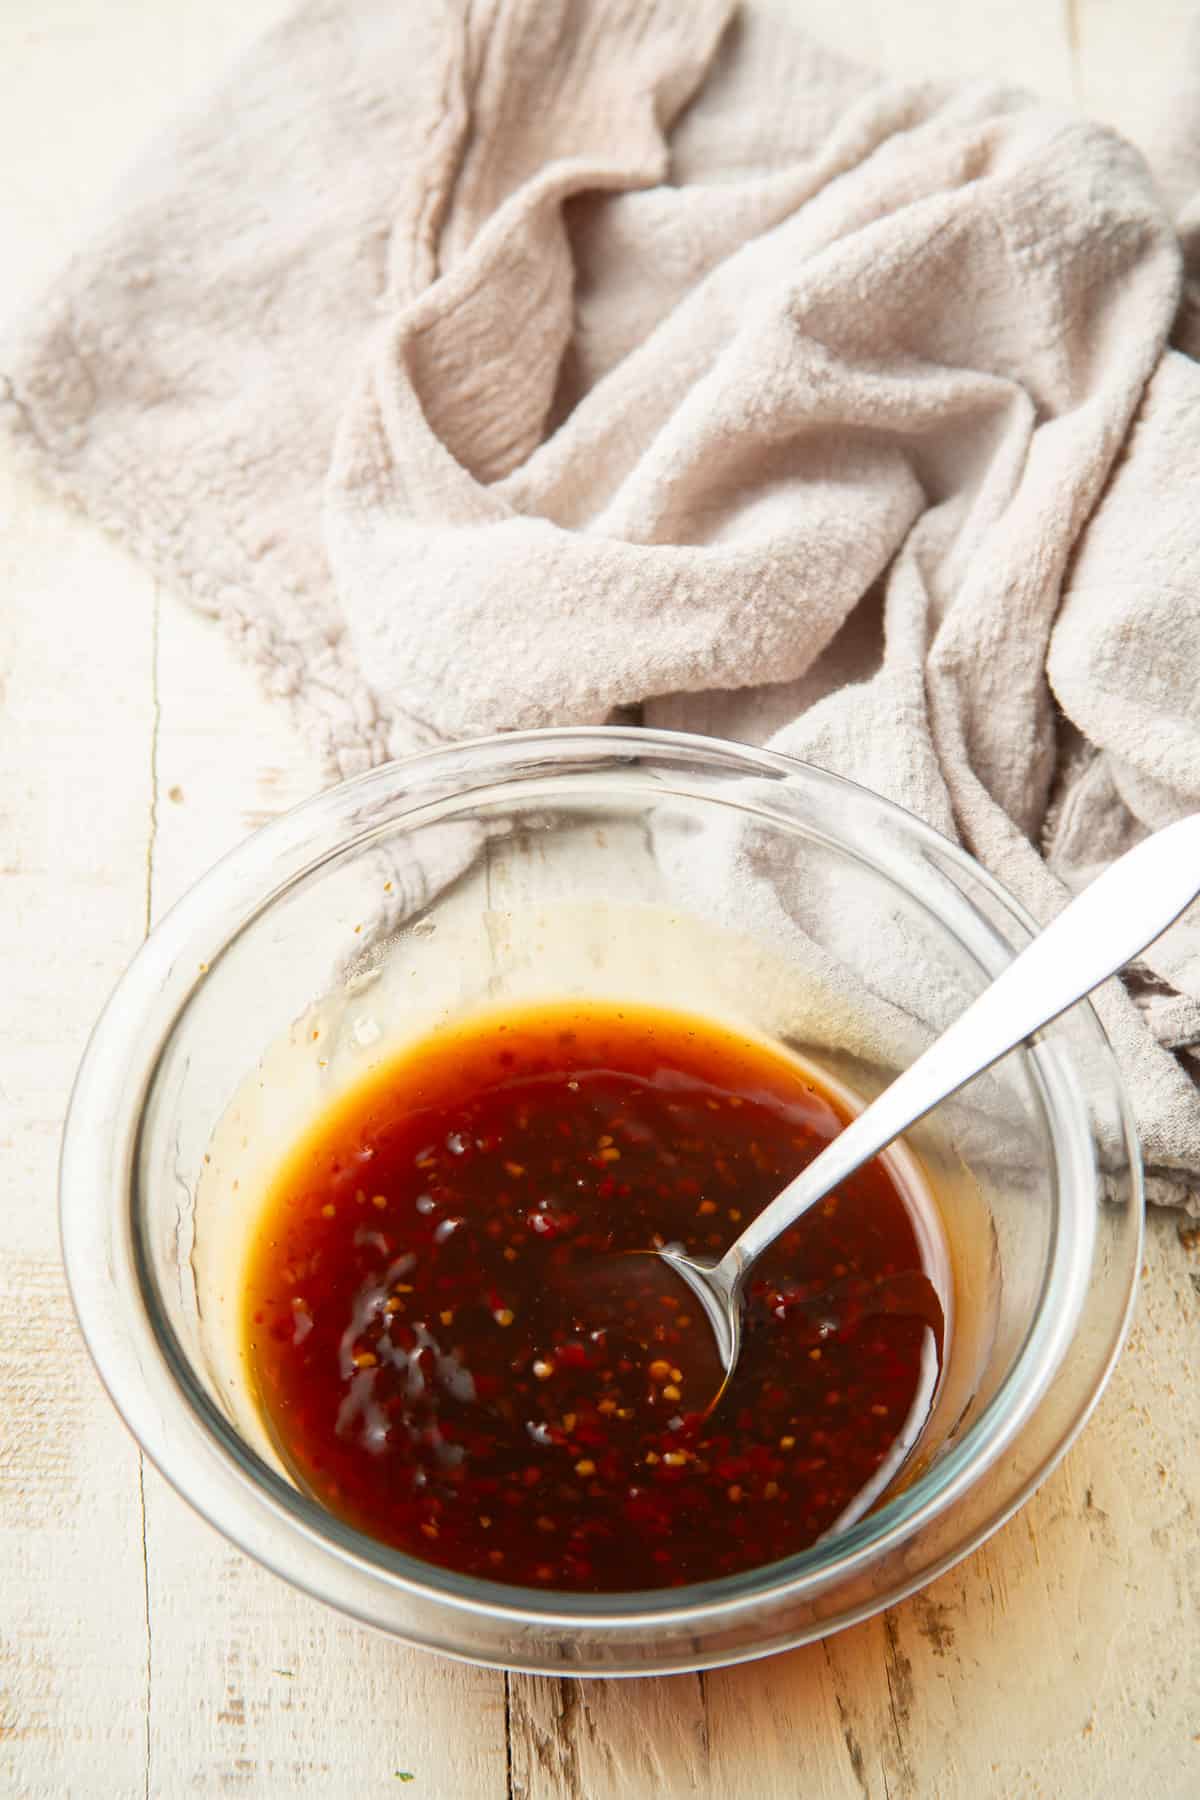 Bowl containing a mixture of sweet chili sauce and soy sauce with a spoon.